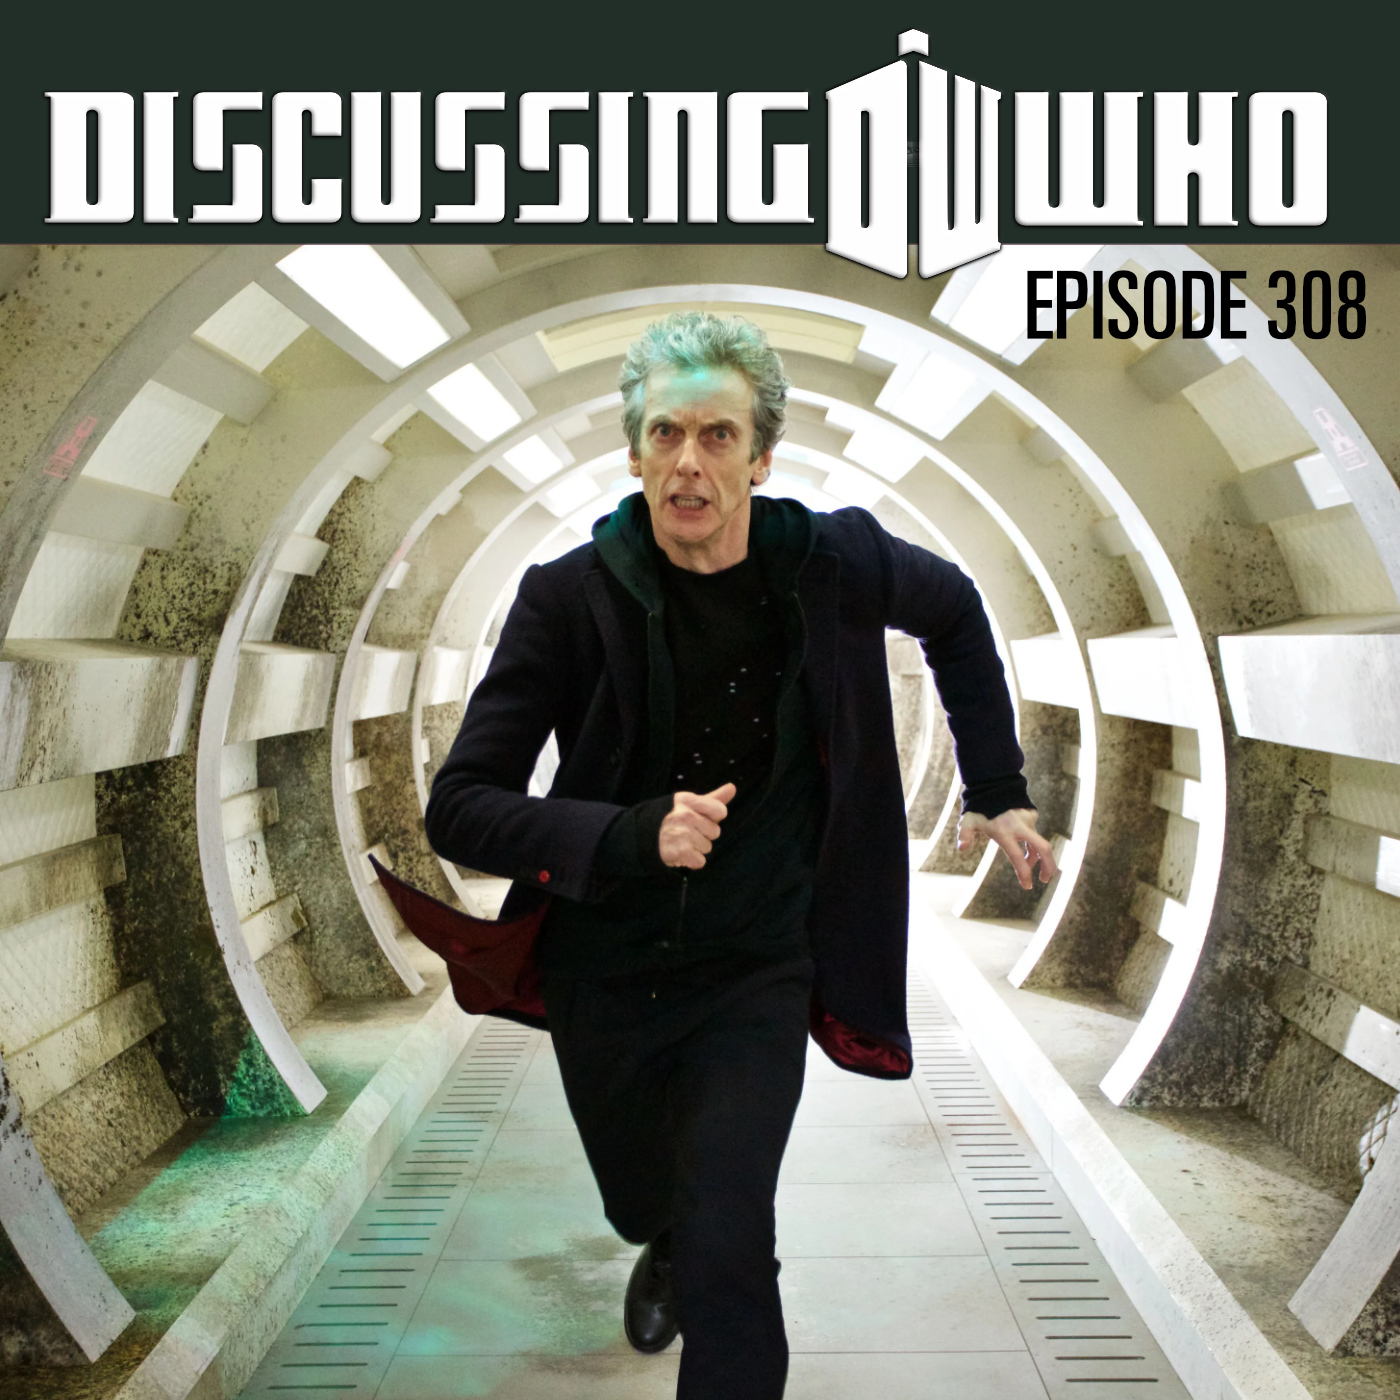 Episode 308: Review of Under the Lake, Doctor Who Series 9 Episode 3